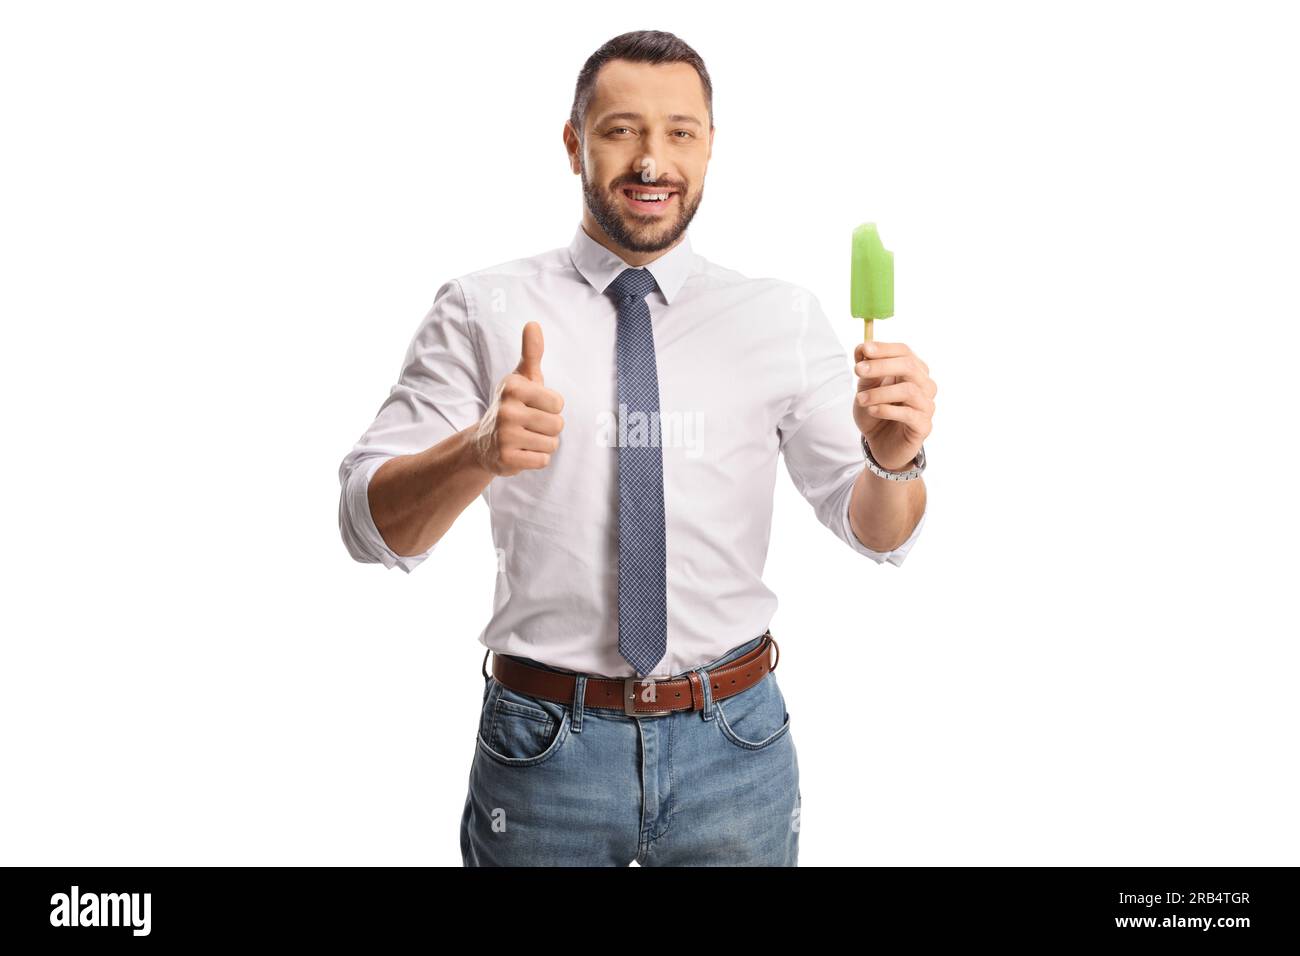 Young man holding an ice cream and showing thumbs up isolated on white background Stock Photo